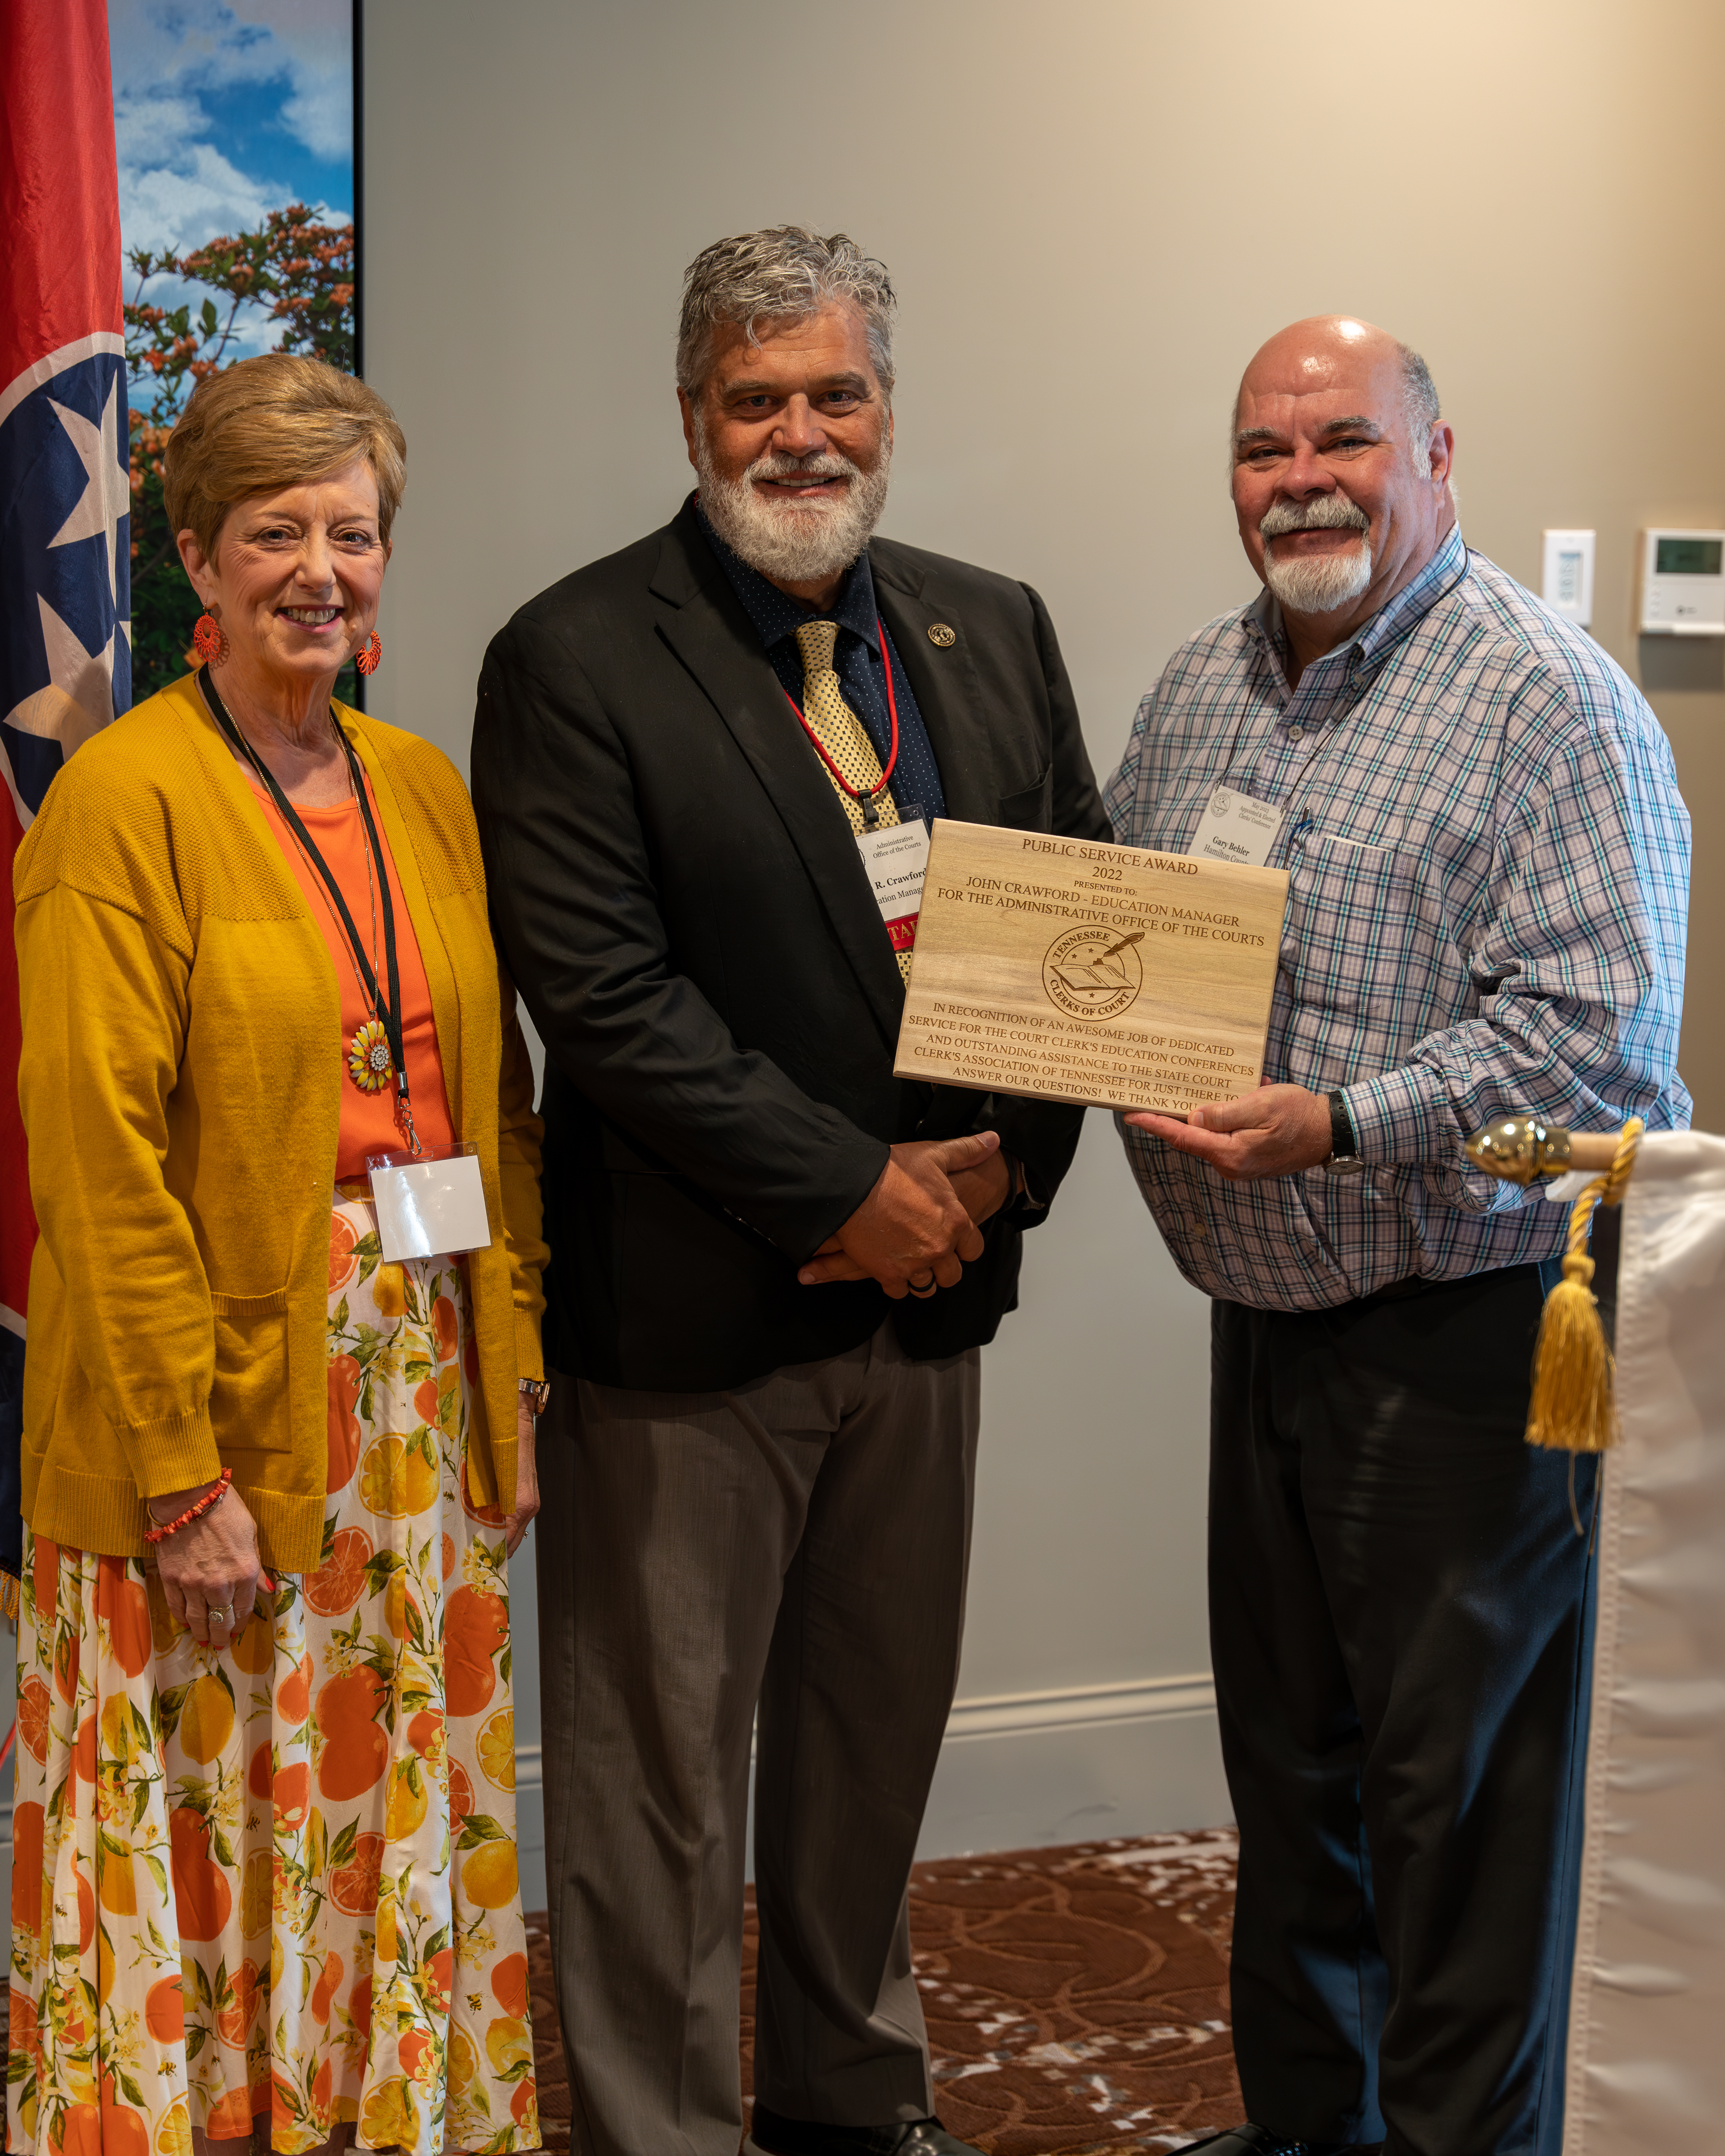 Rebecca Bartlett Carpenter, Clerk and Master of Lincoln County and current Clerks Conference President; John Crawford, AOC Education Manager and Gary Behler, Juvenile Court Clerk of Hamilton County and 2022 Conference President.